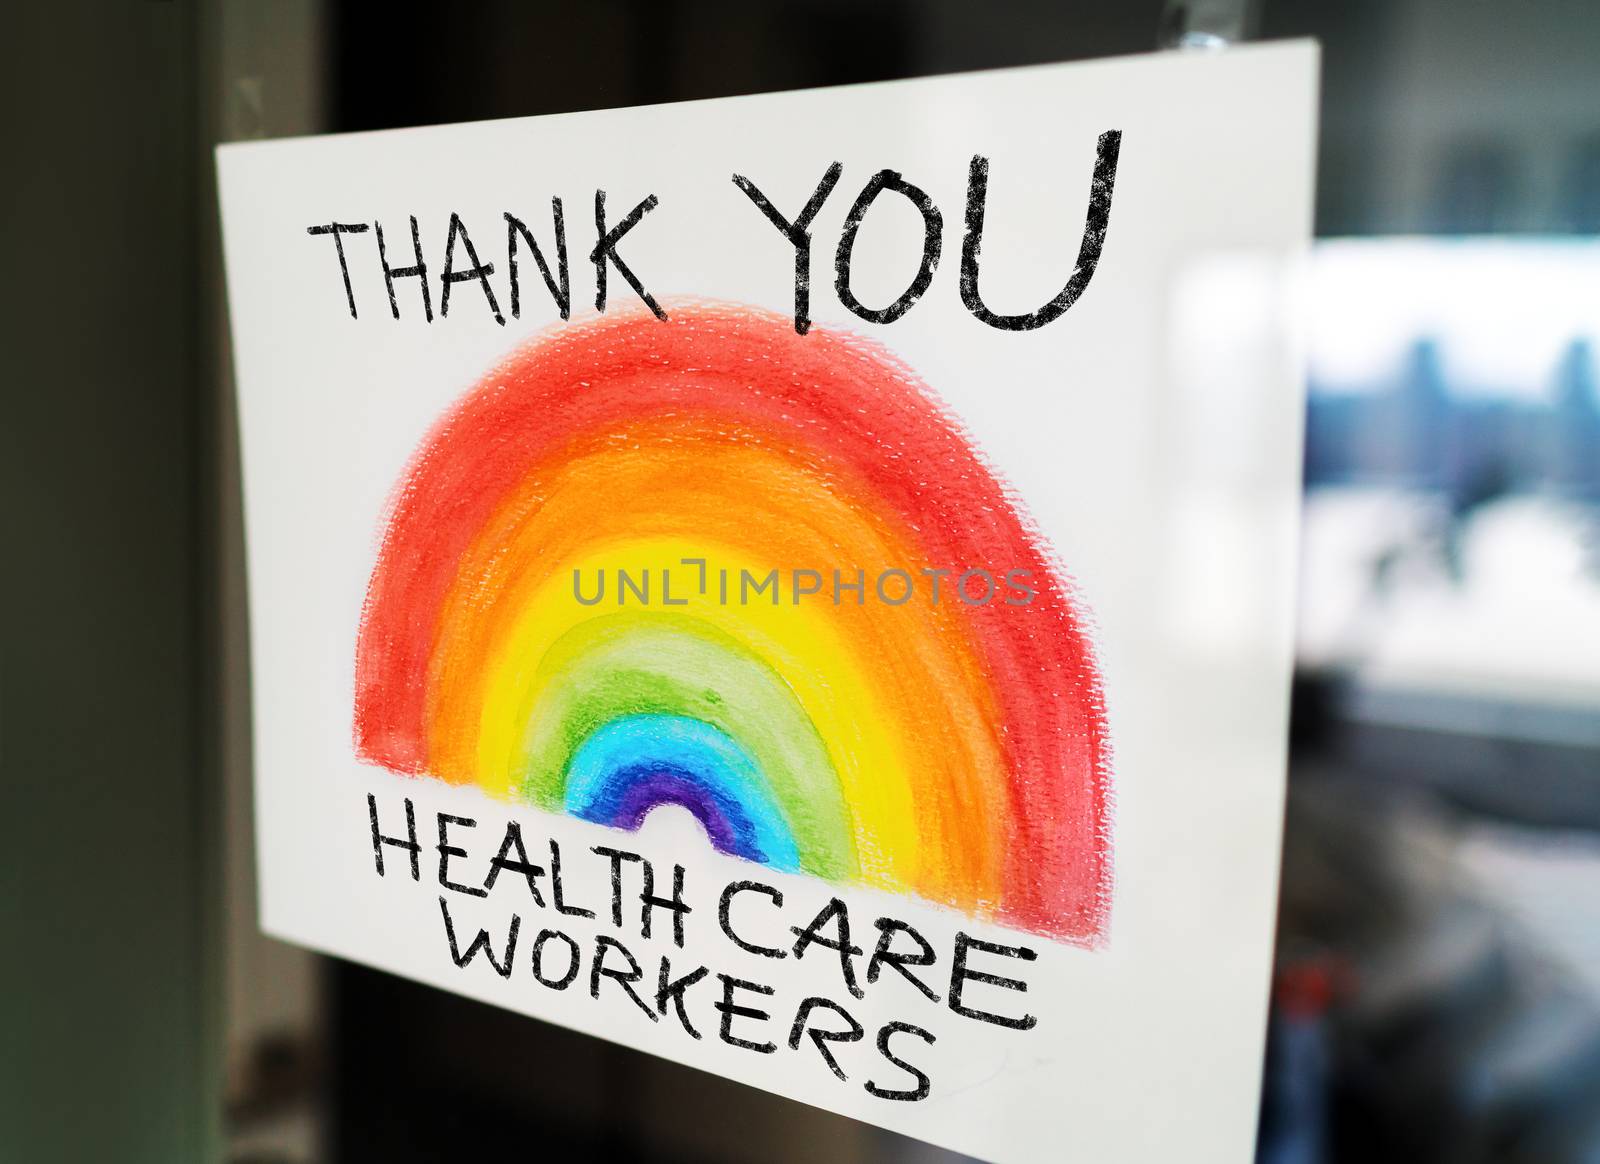 THANK YOU Healthcare workers child's painting hanging at window as appreciation support message for doctors and nurses fighting COVID-19 at hospitals by Maridav